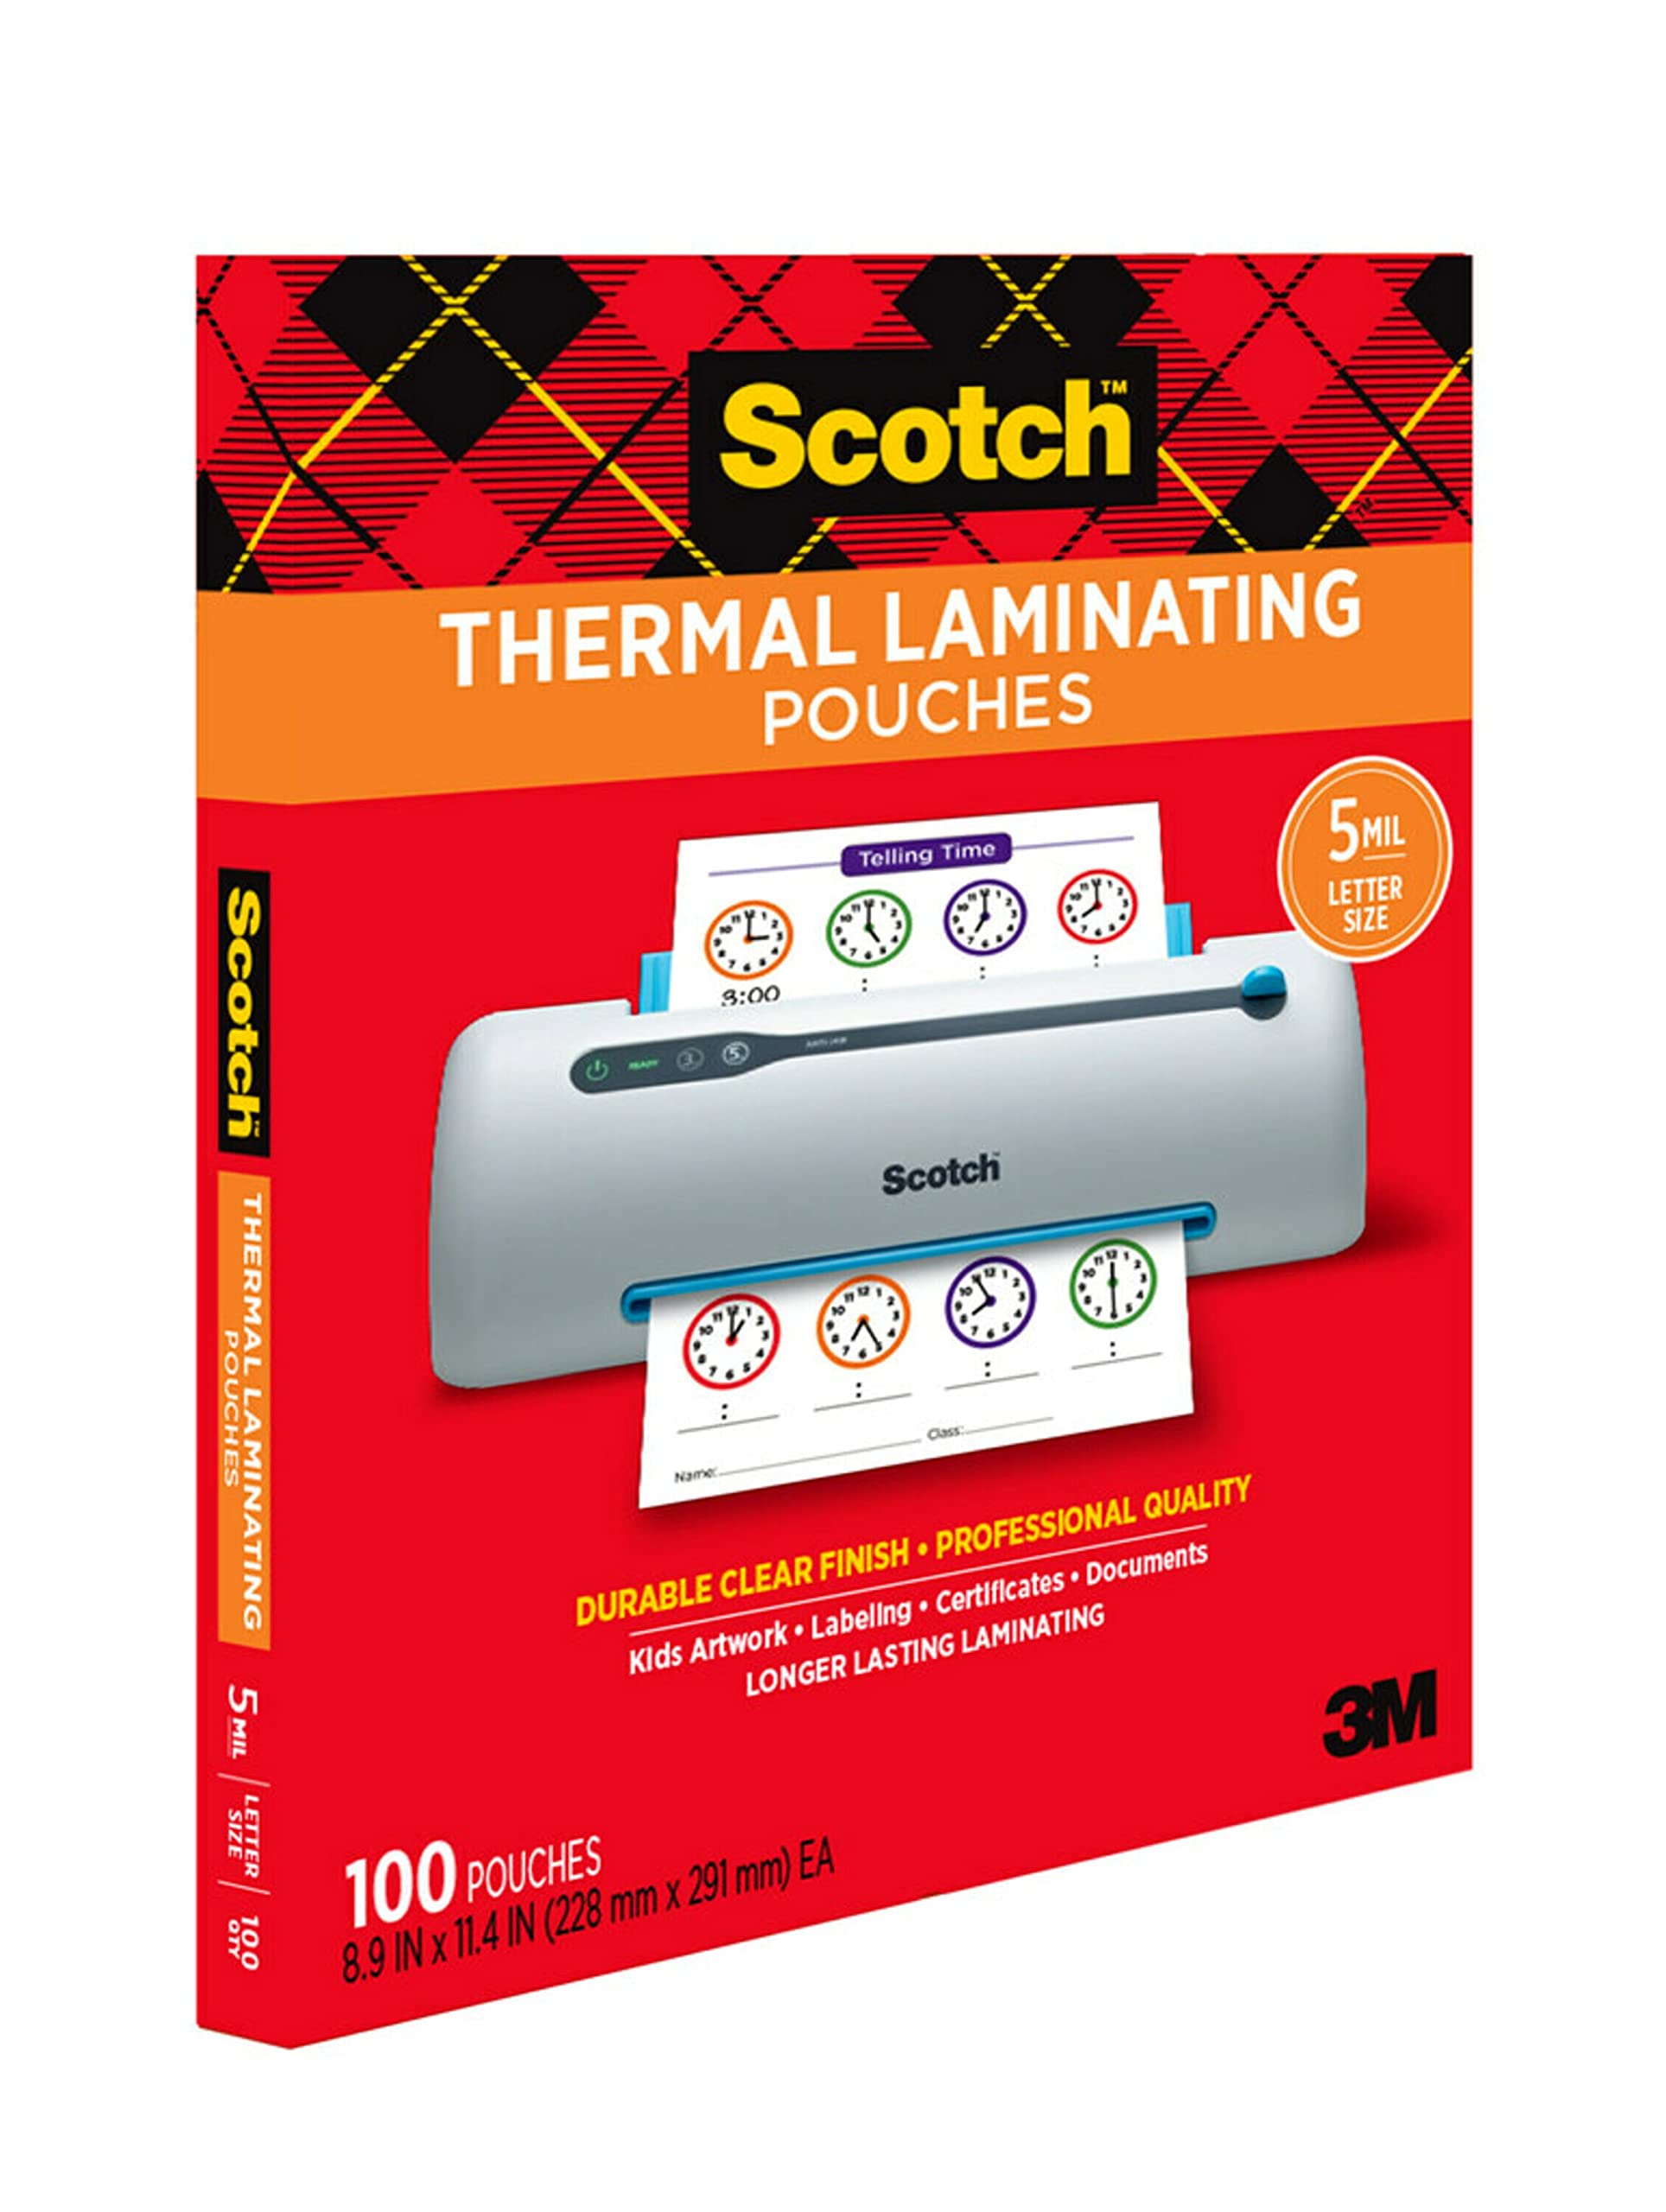 Scotch Thermal Laminating Pouches Premium Quality, 5 Mil Thick for Extra Protection, 100 Pack Letter Size Laminating Sheets, Our Most Durable Lamination Pouch, 8.9 x 11.4 inches, Clear (TP5854-100)